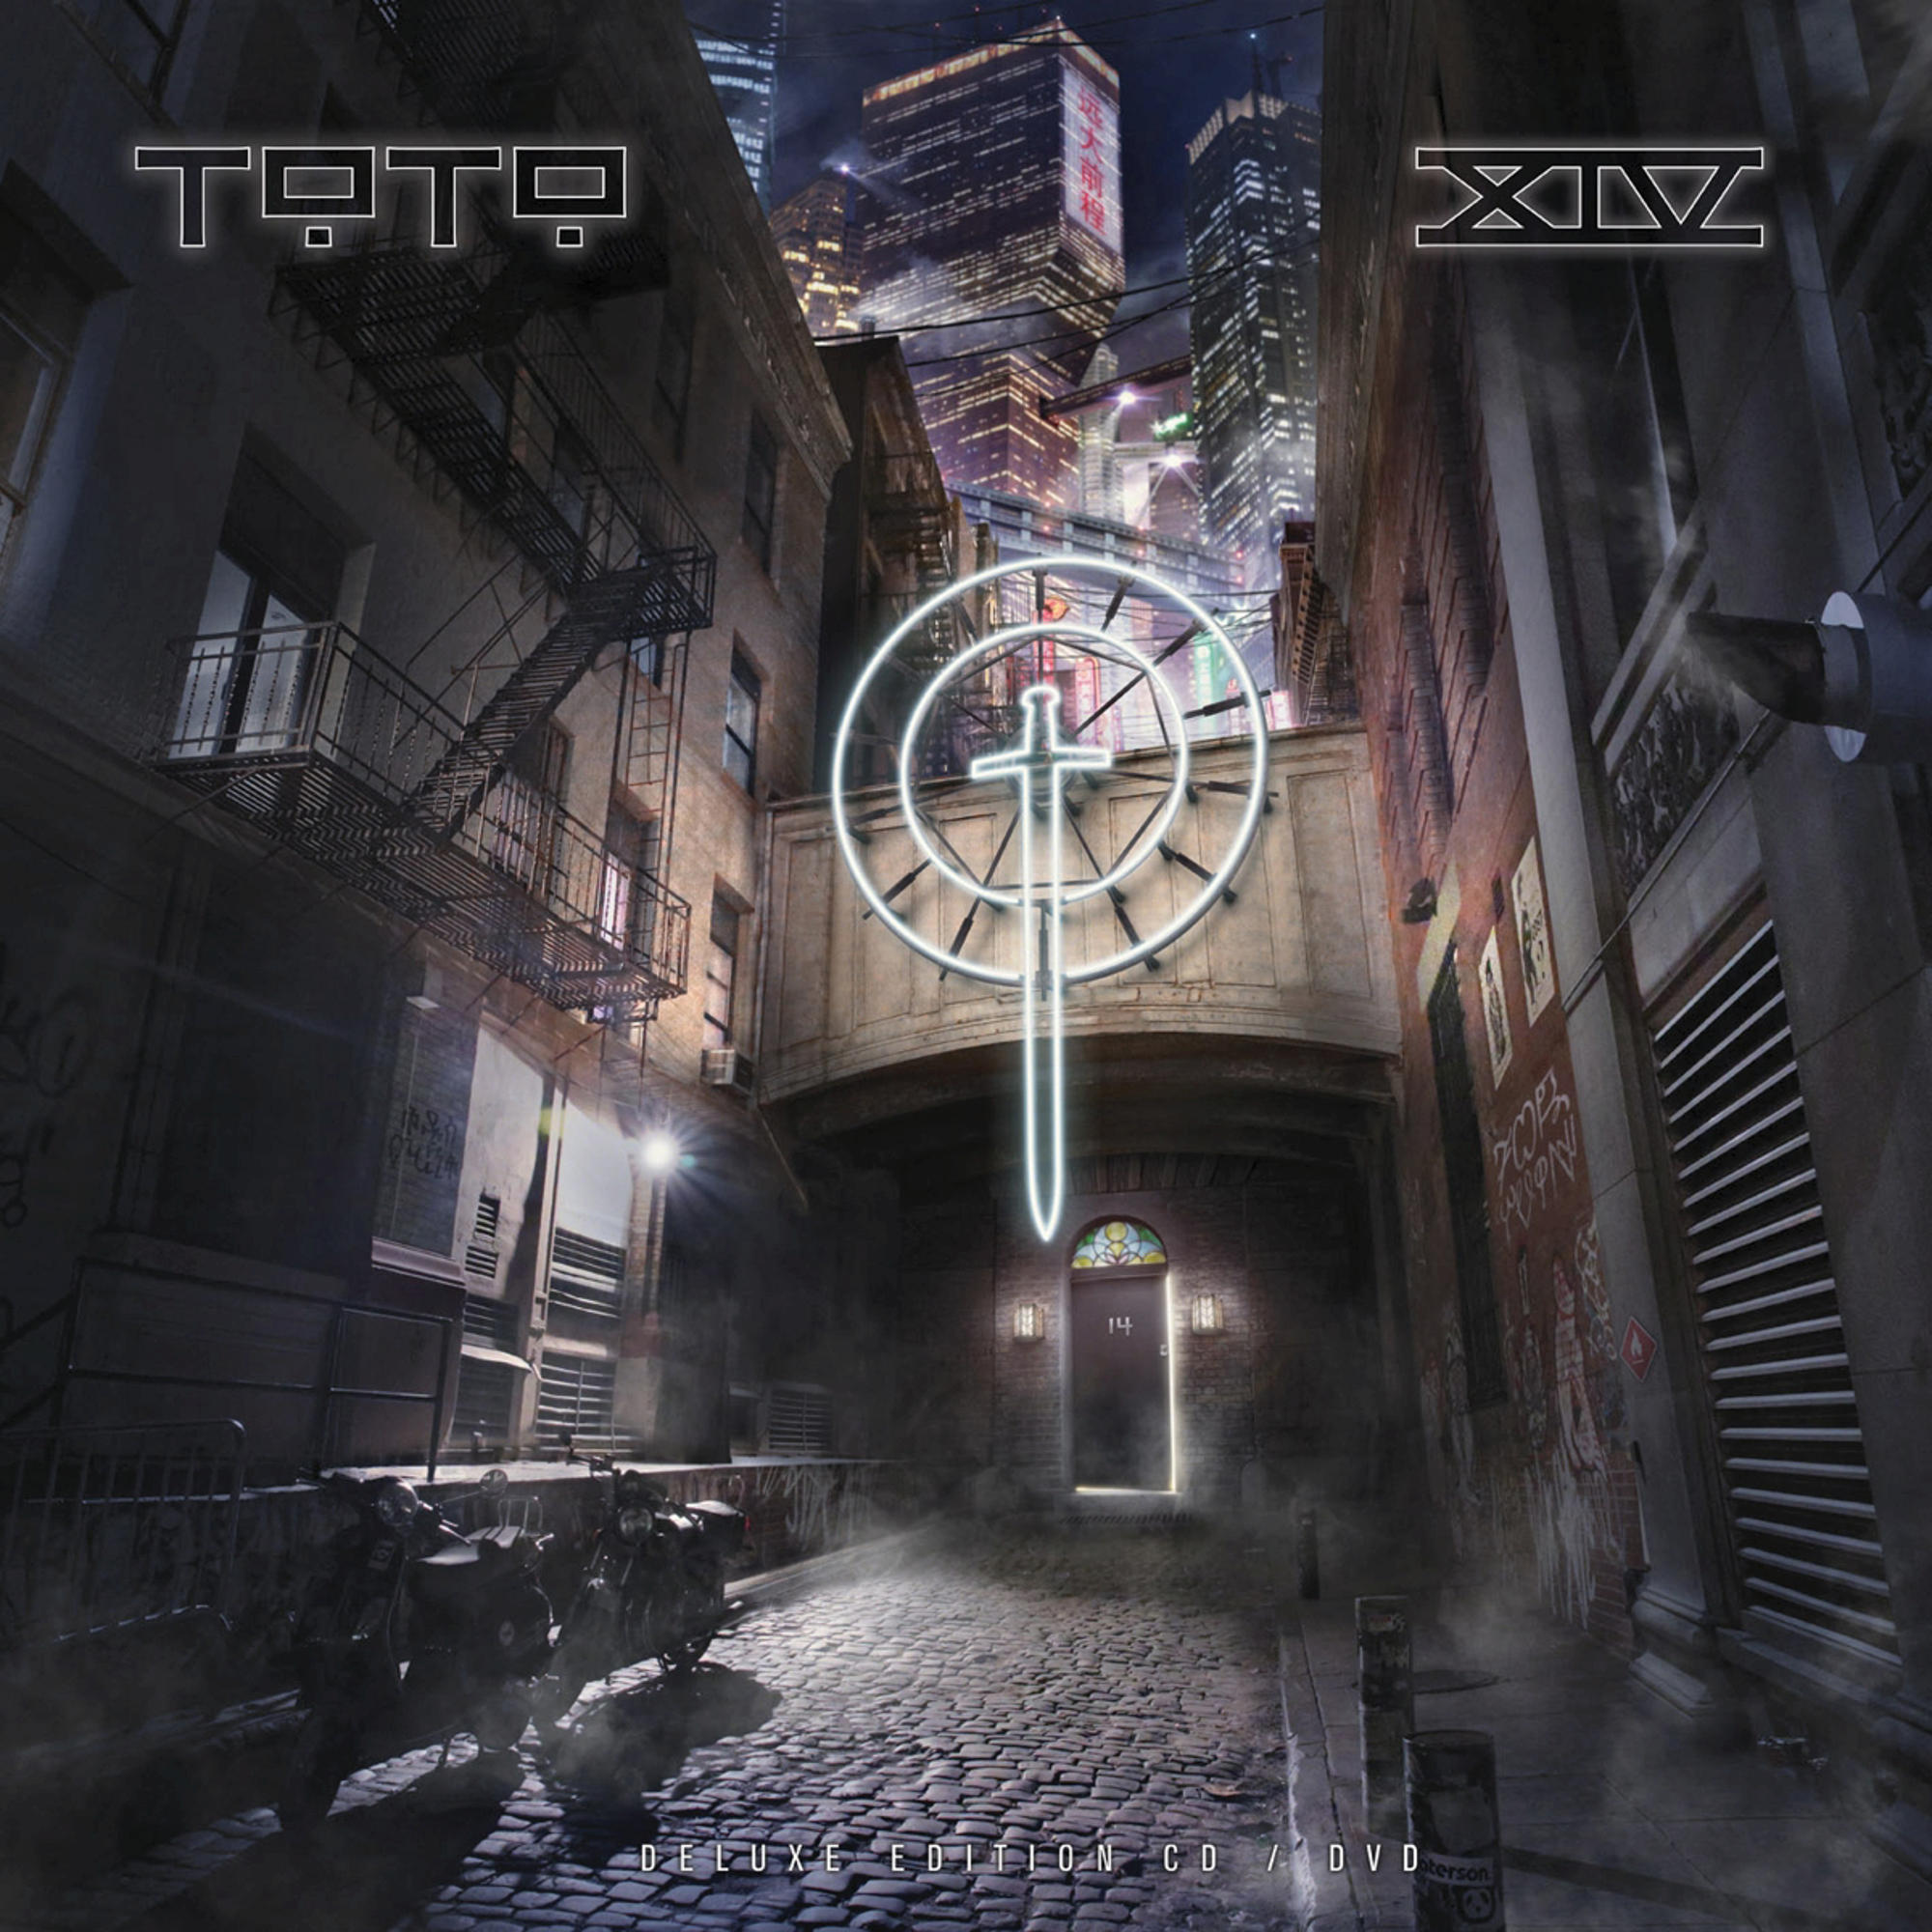 Toto - Toto XIV (Limited Edition) - Video) Ecolbook DVD (CD 